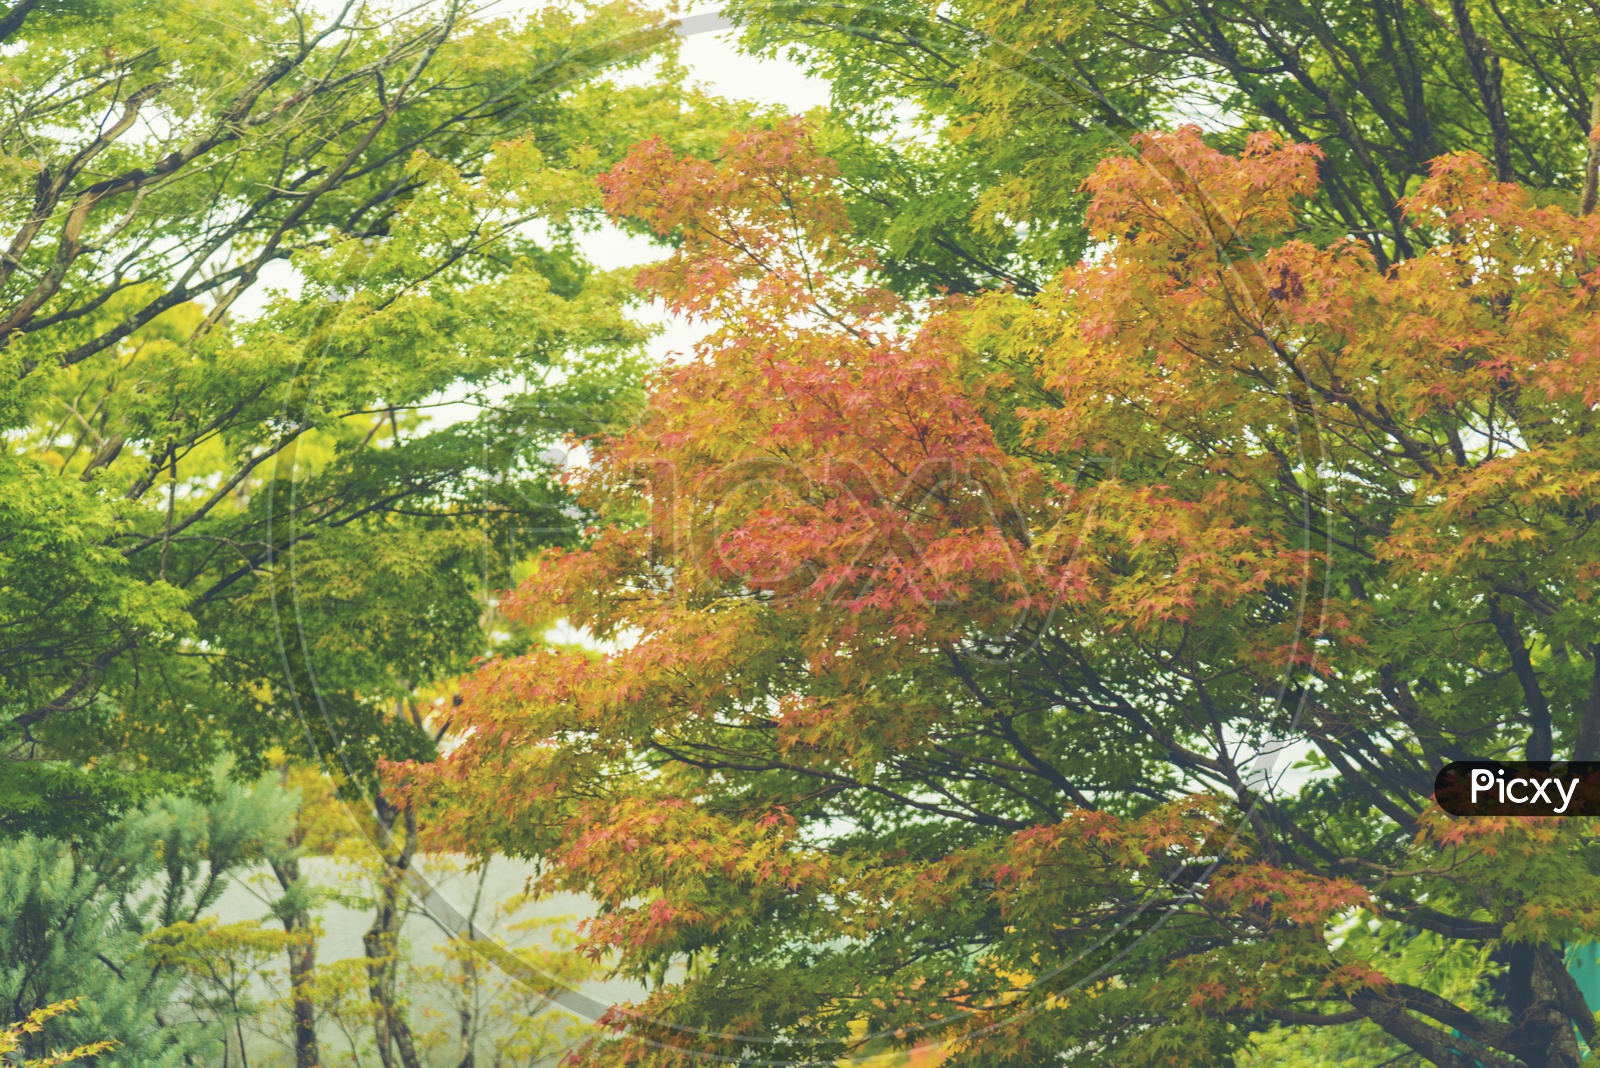 Red and Orange leaves of trees in Japan Forest